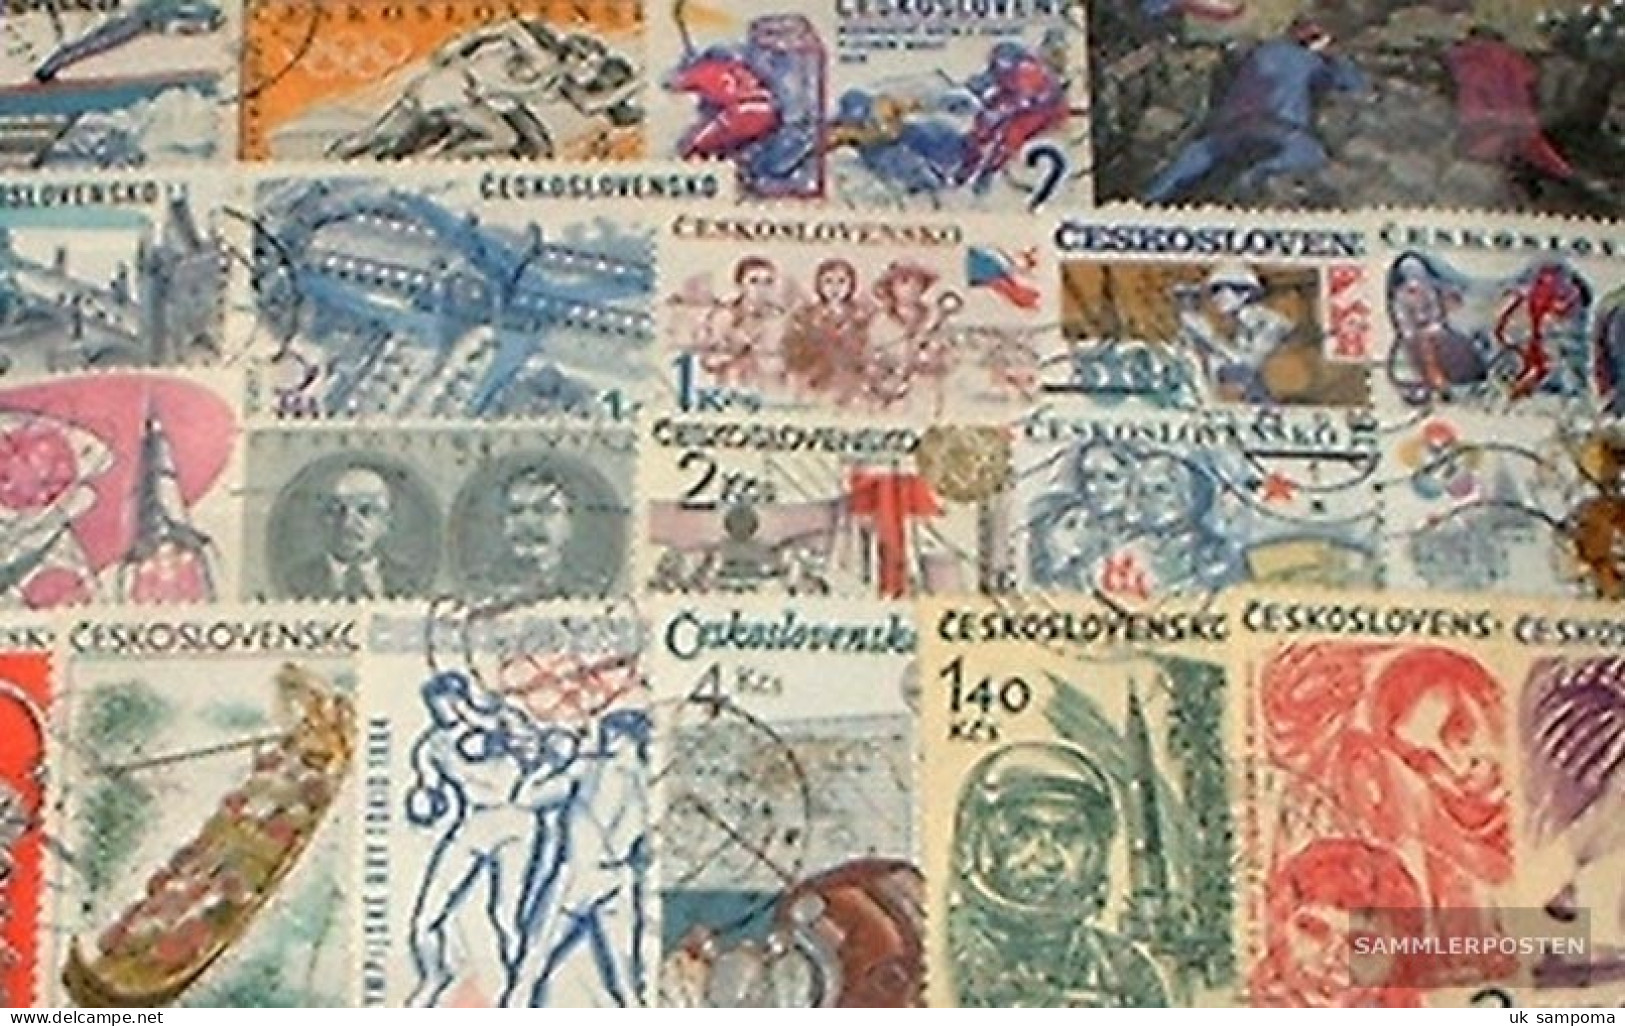 Czechoslovakia 200 Different Special Stamps - Collections, Lots & Series